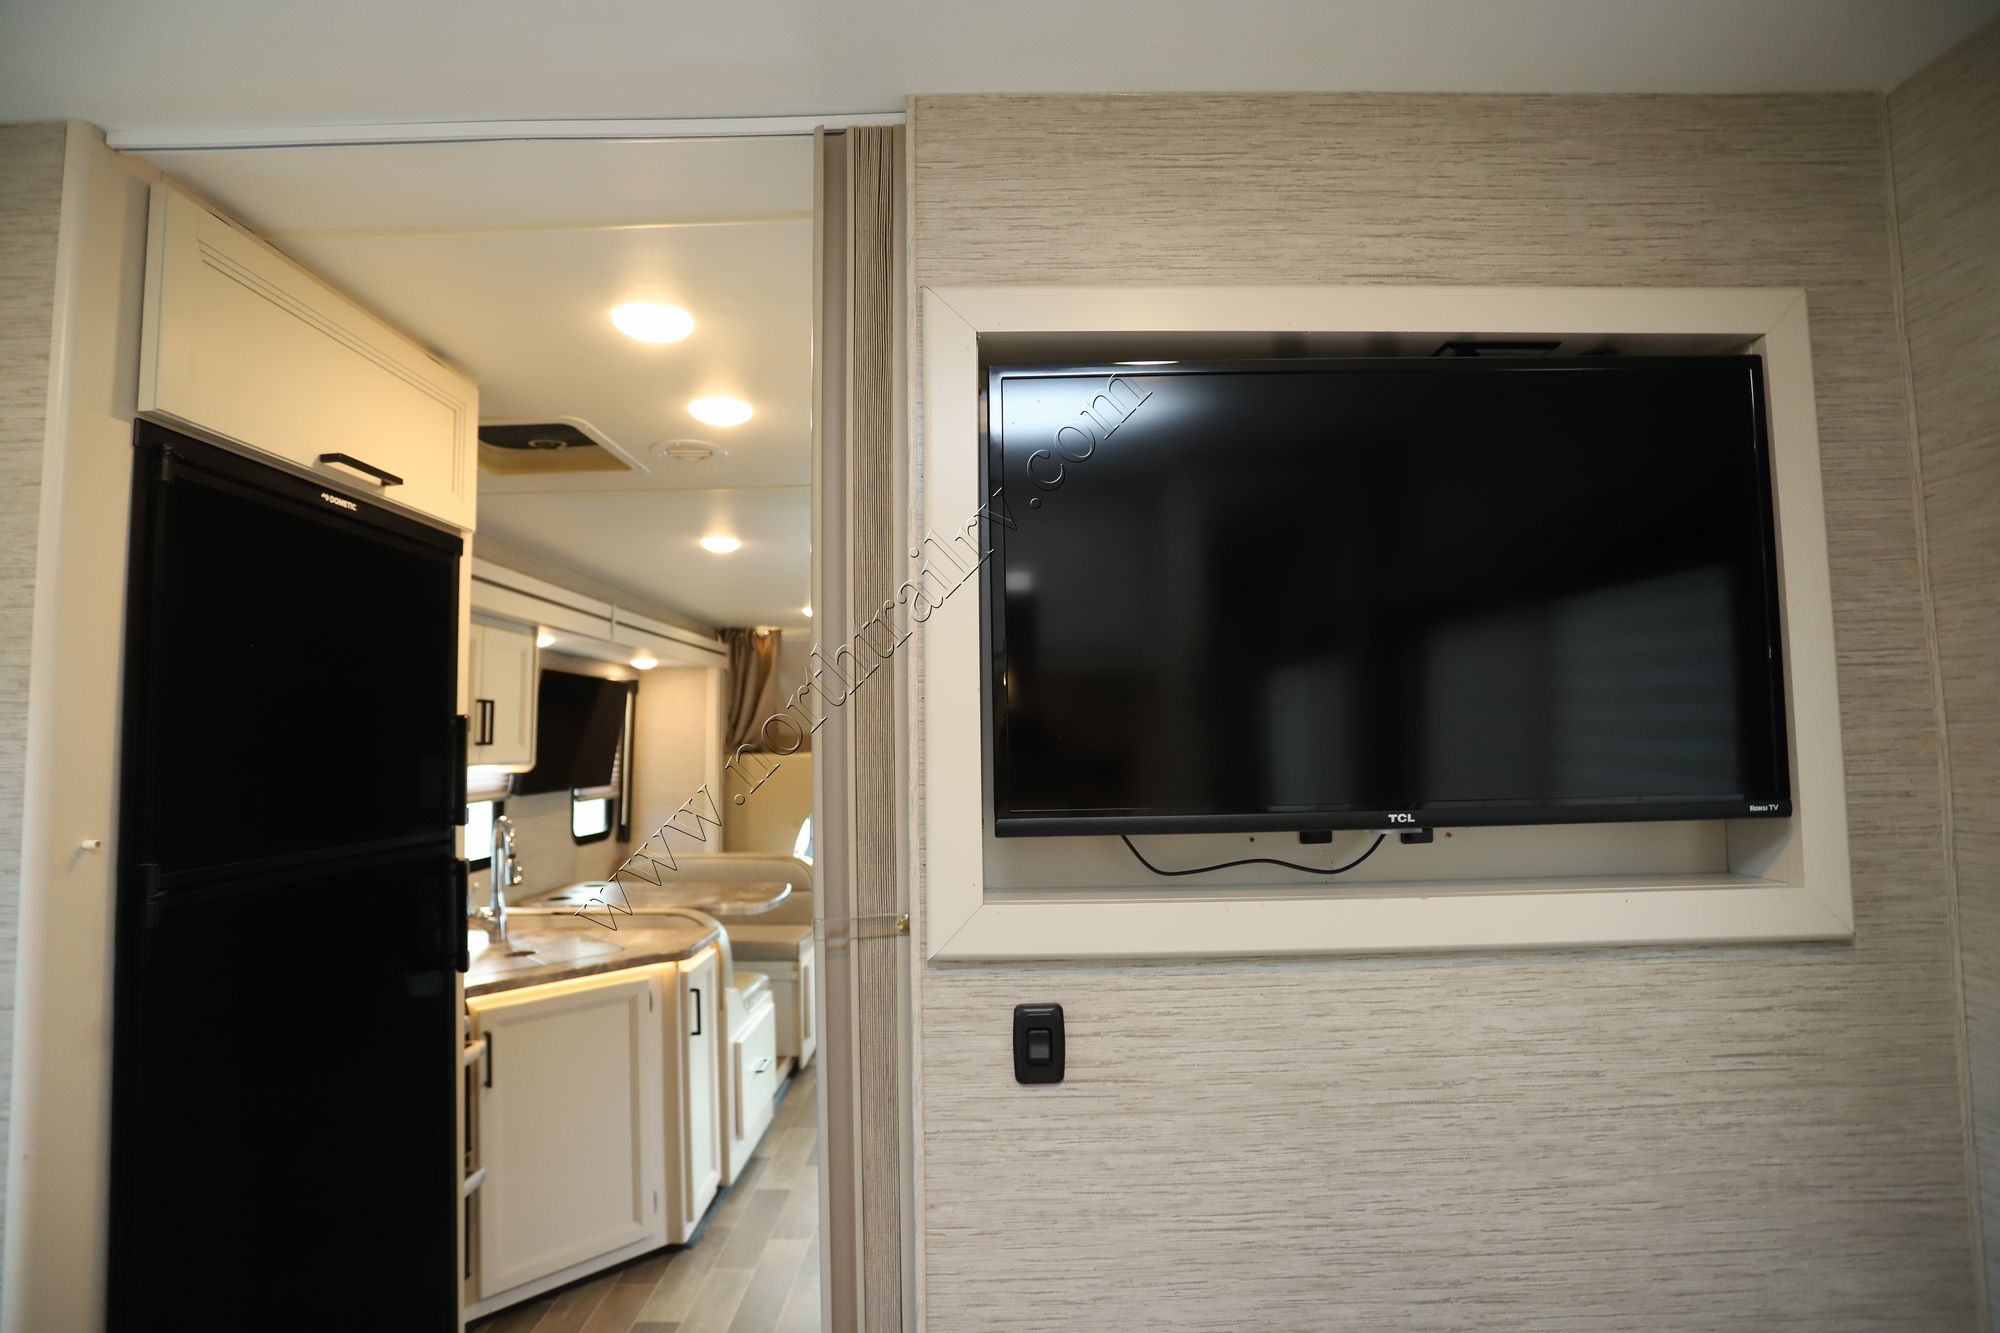 Used 2022 Thor Chateau 28Z Class C  For Sale